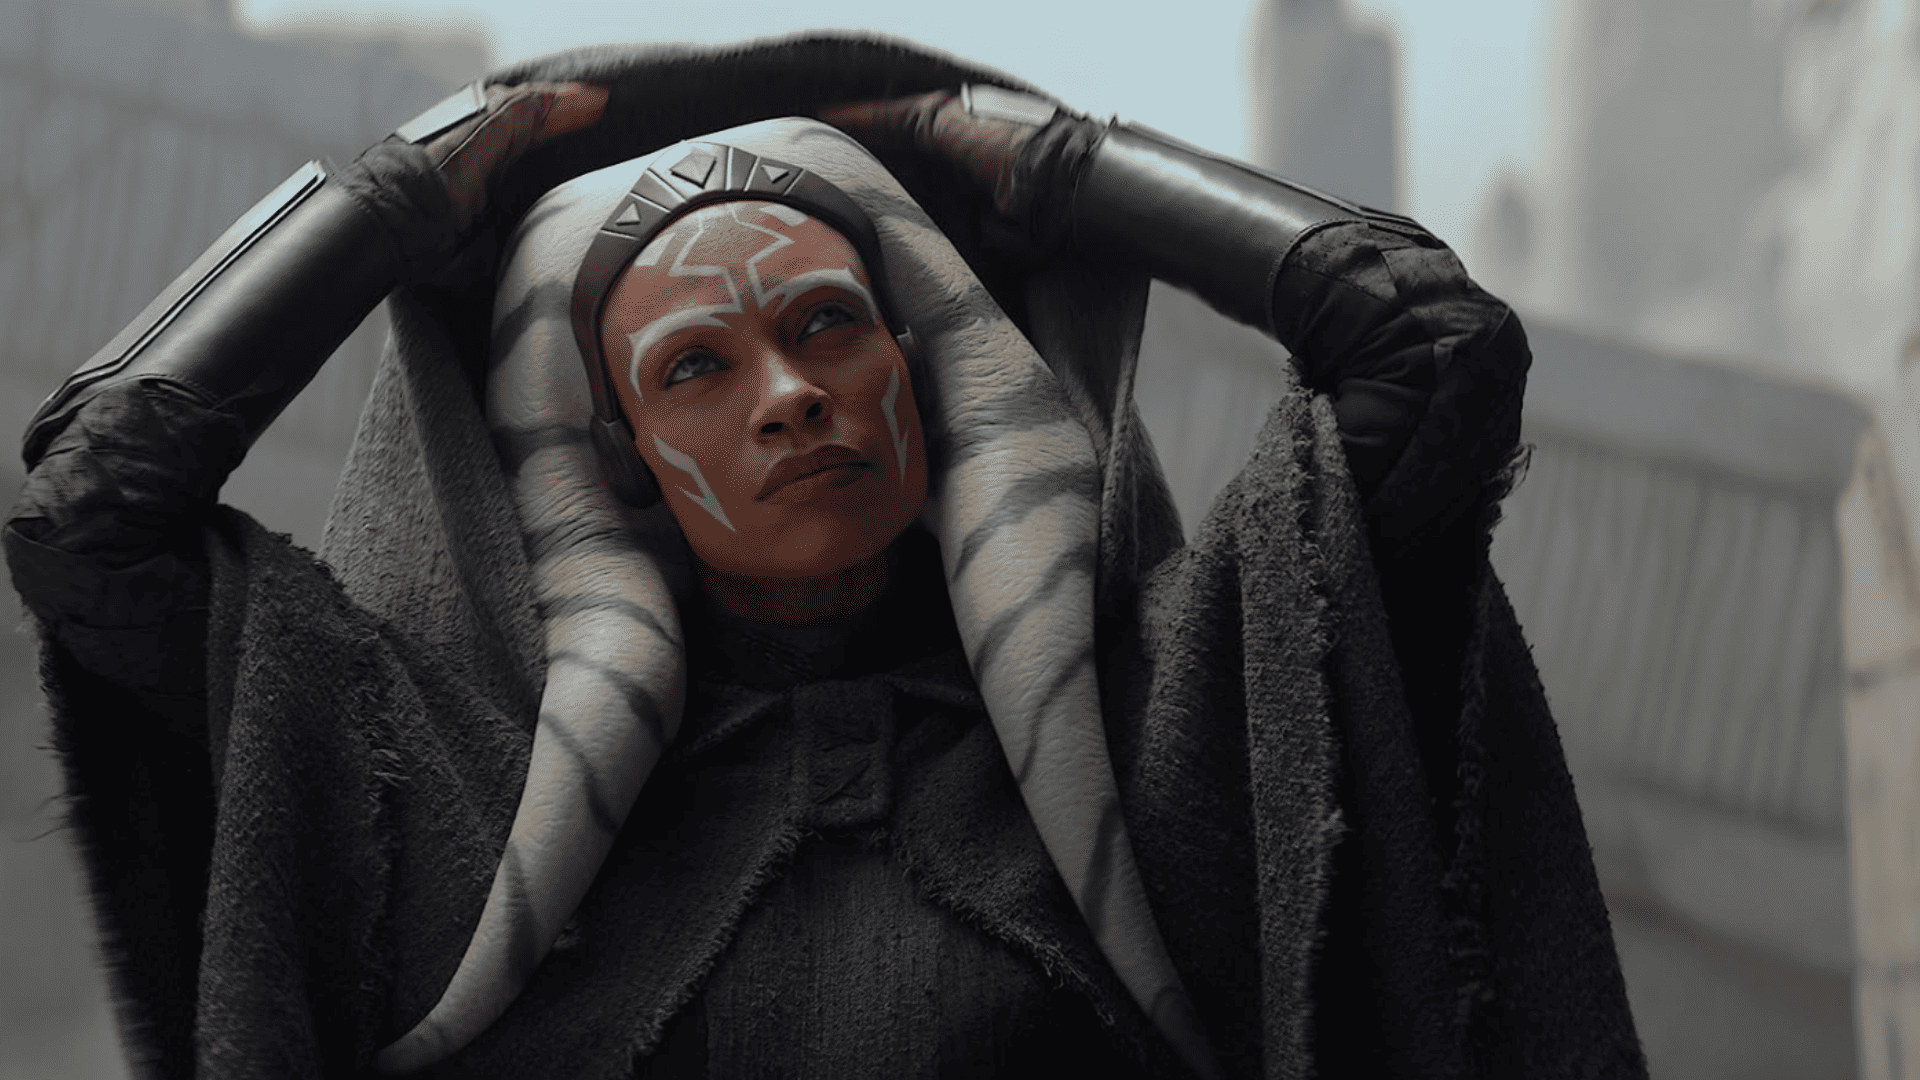 Rosario Dawson reveals her face from beneath a hooded cloak in this image from Lucasfilm